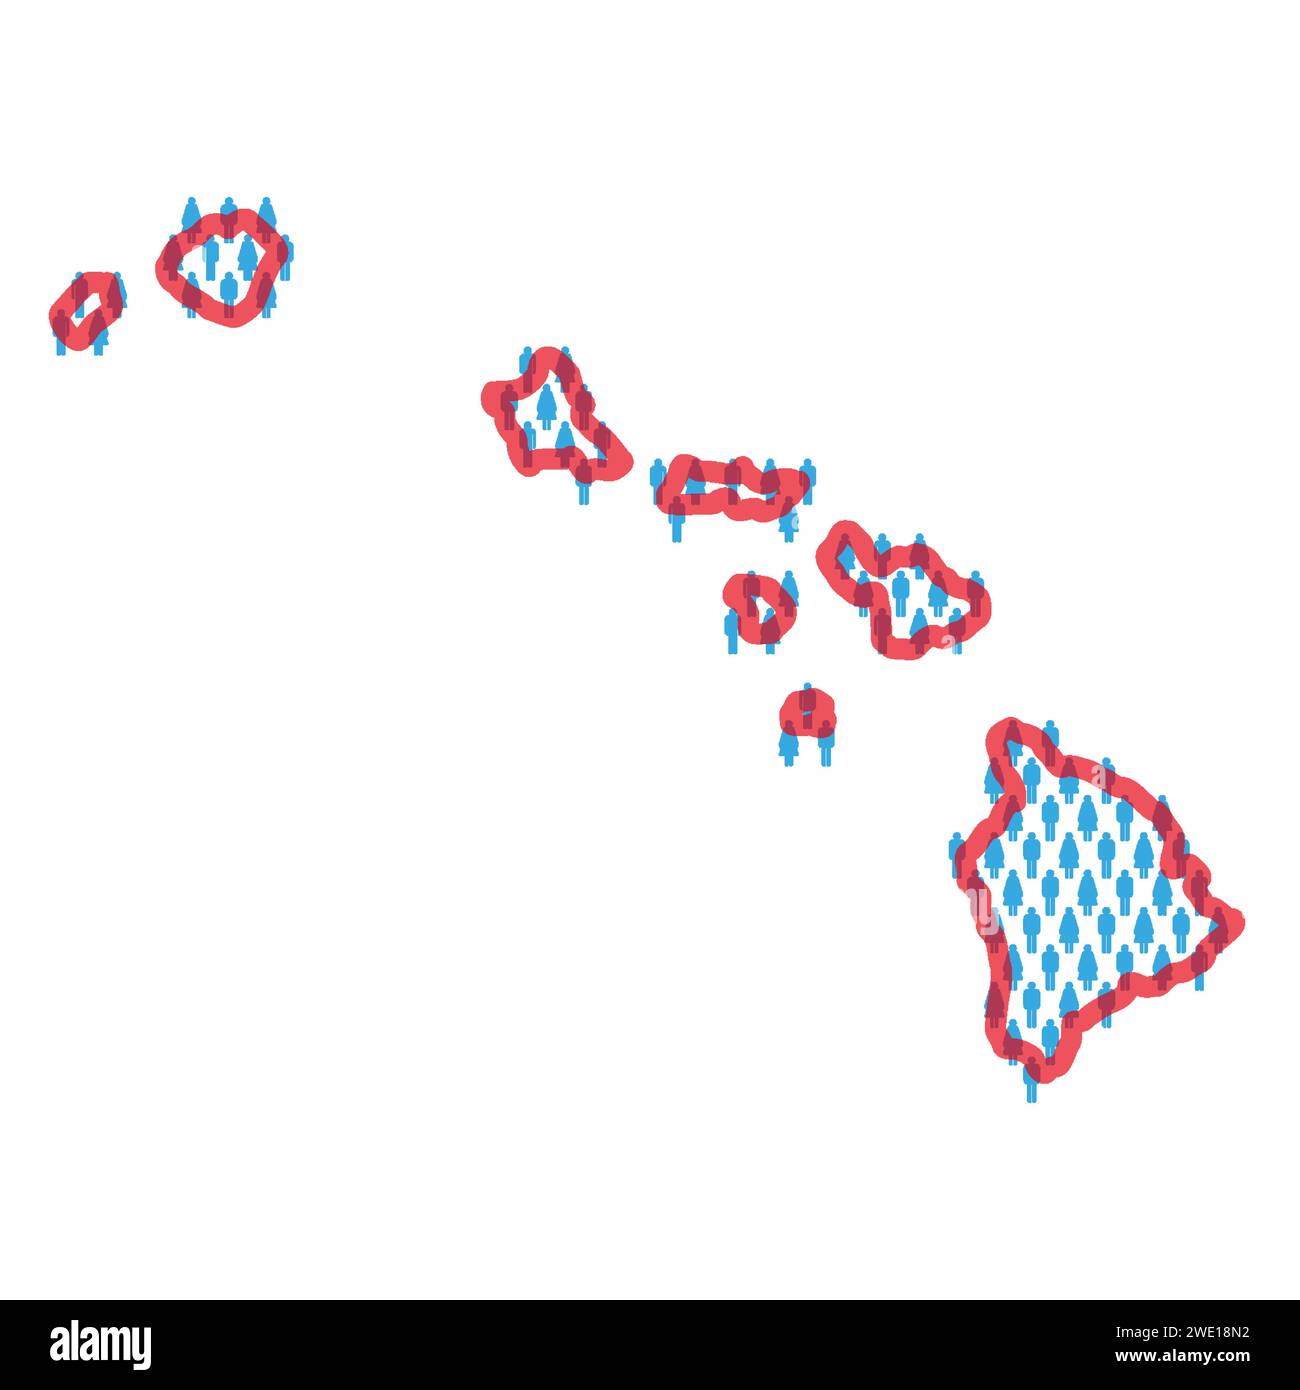 Hawaii population map. Stick figures people map with bold red translucent state border. Pattern of men and women icons. Isolated vector illustration. Stock Vector